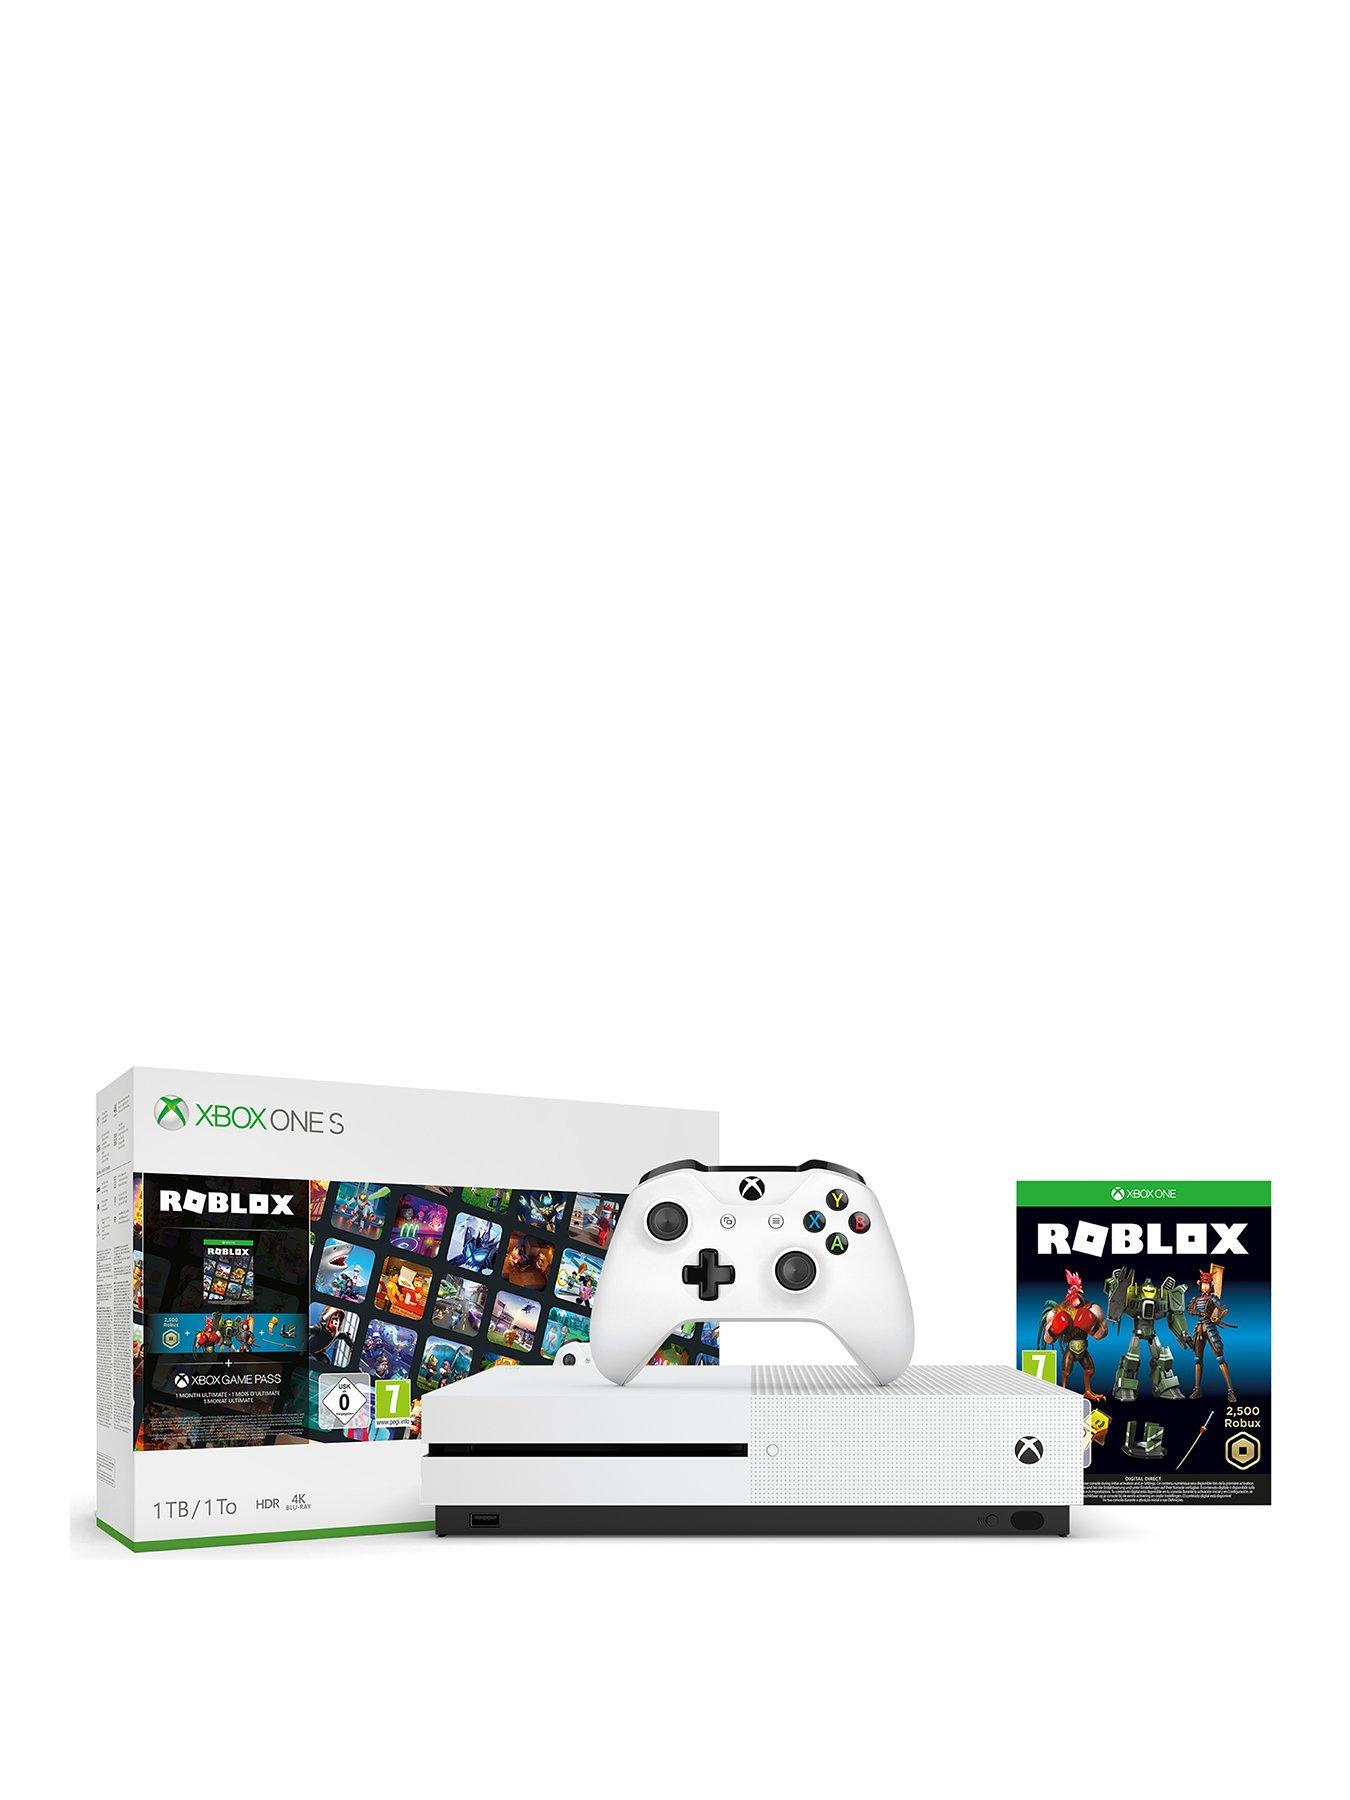 Xbox One S With Roblox Bundle And Optional Extras 1tb Console White Very Co Uk - roblox dvd for xbox 360